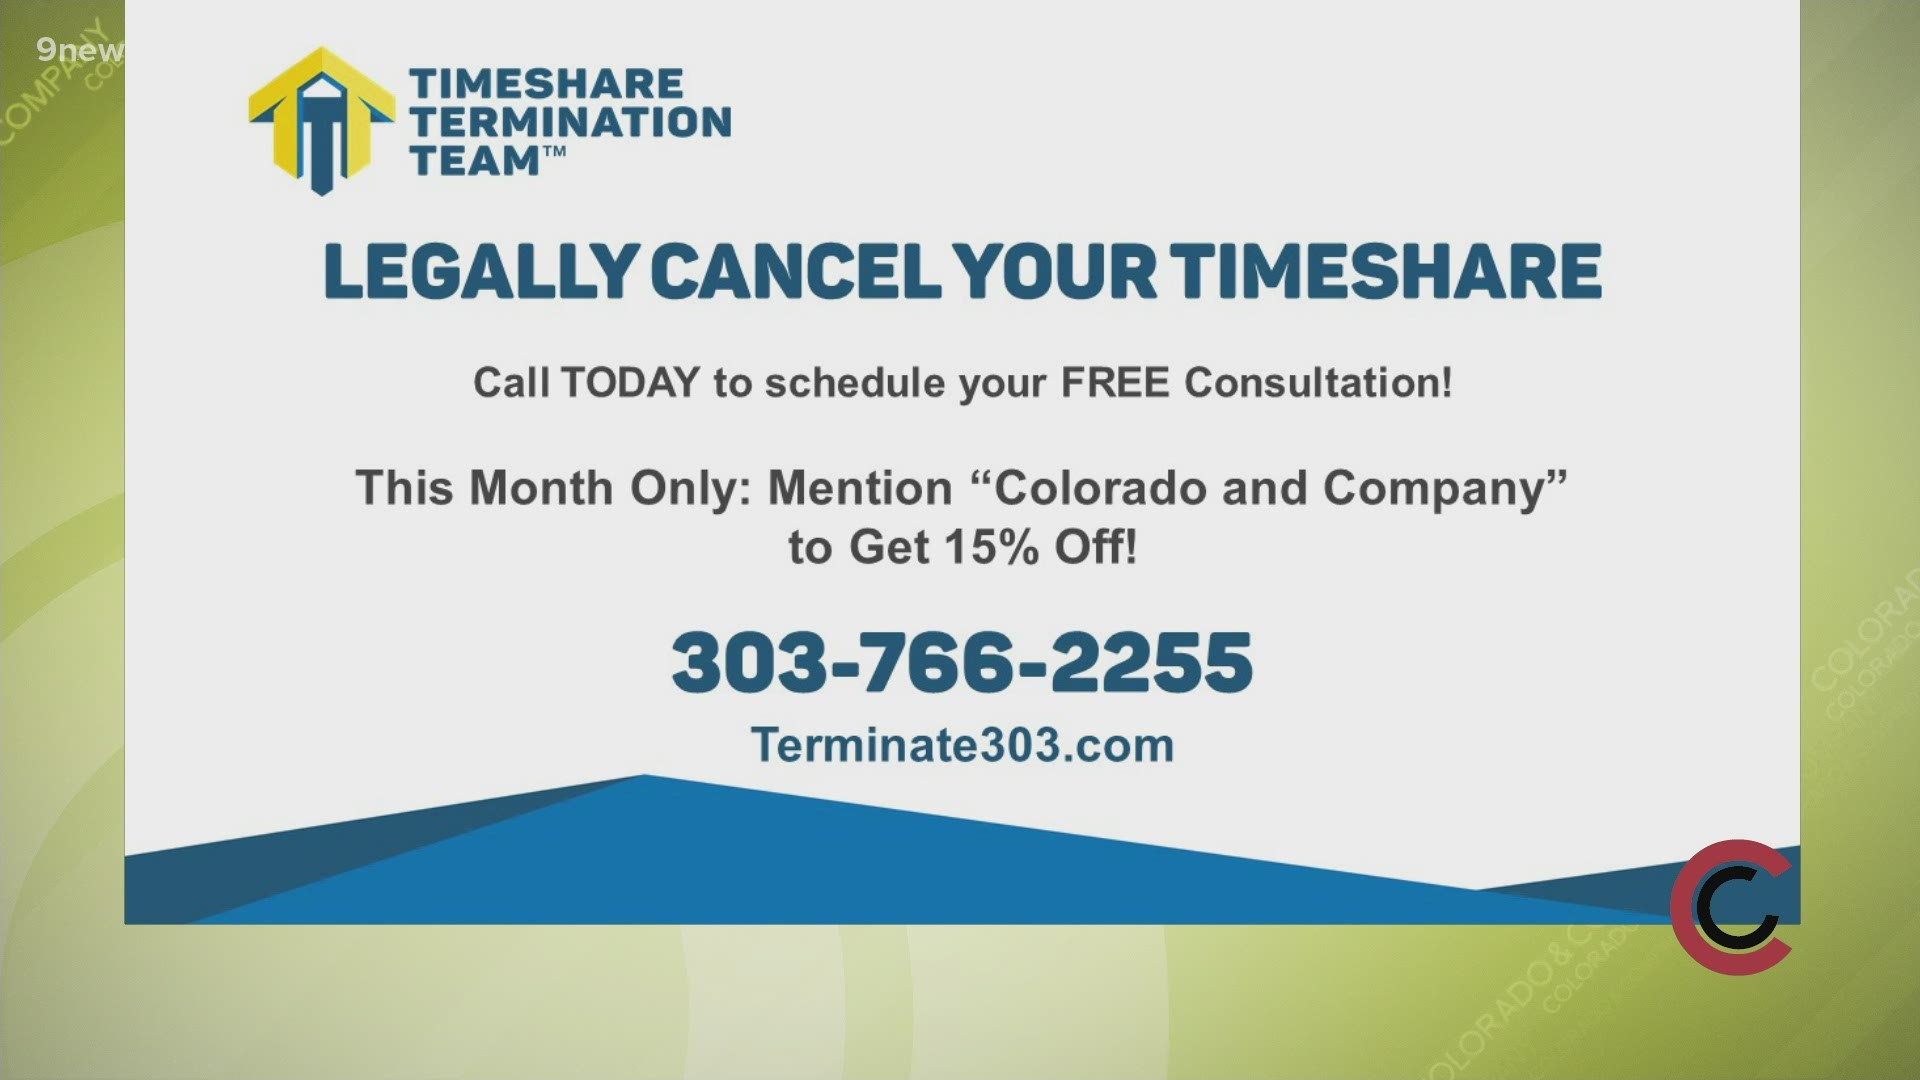 Call Timeshare Termination Team at 303.766.2255 to get started on getting out of your timeshare today. Mention CoCo and save 15%! Learn more at Terminate303.com.